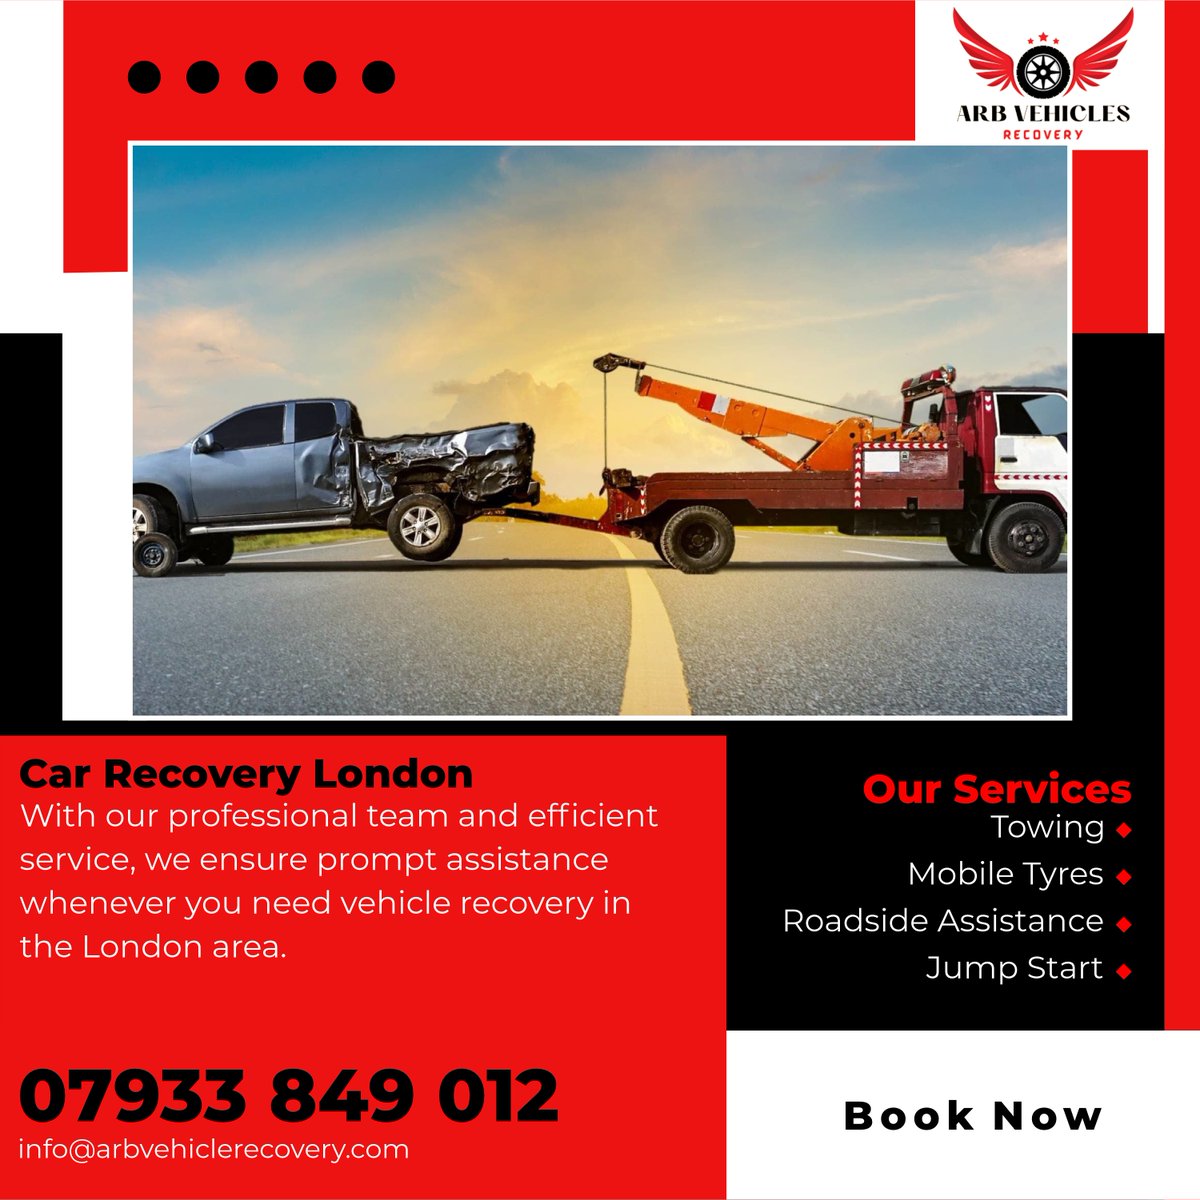 ARB Vehicle Recovery offers efficient car recovery services in London, ensuring prompt assistance for vehicle breakdowns or emergencies in the Caistor Park Rd area.
arbvehiclerecovery.co.uk
#CarRecoveryLondon
#BreakdownAssistance
#VehicleRecovery
#LondonRoadside
#EmergencyRecovery